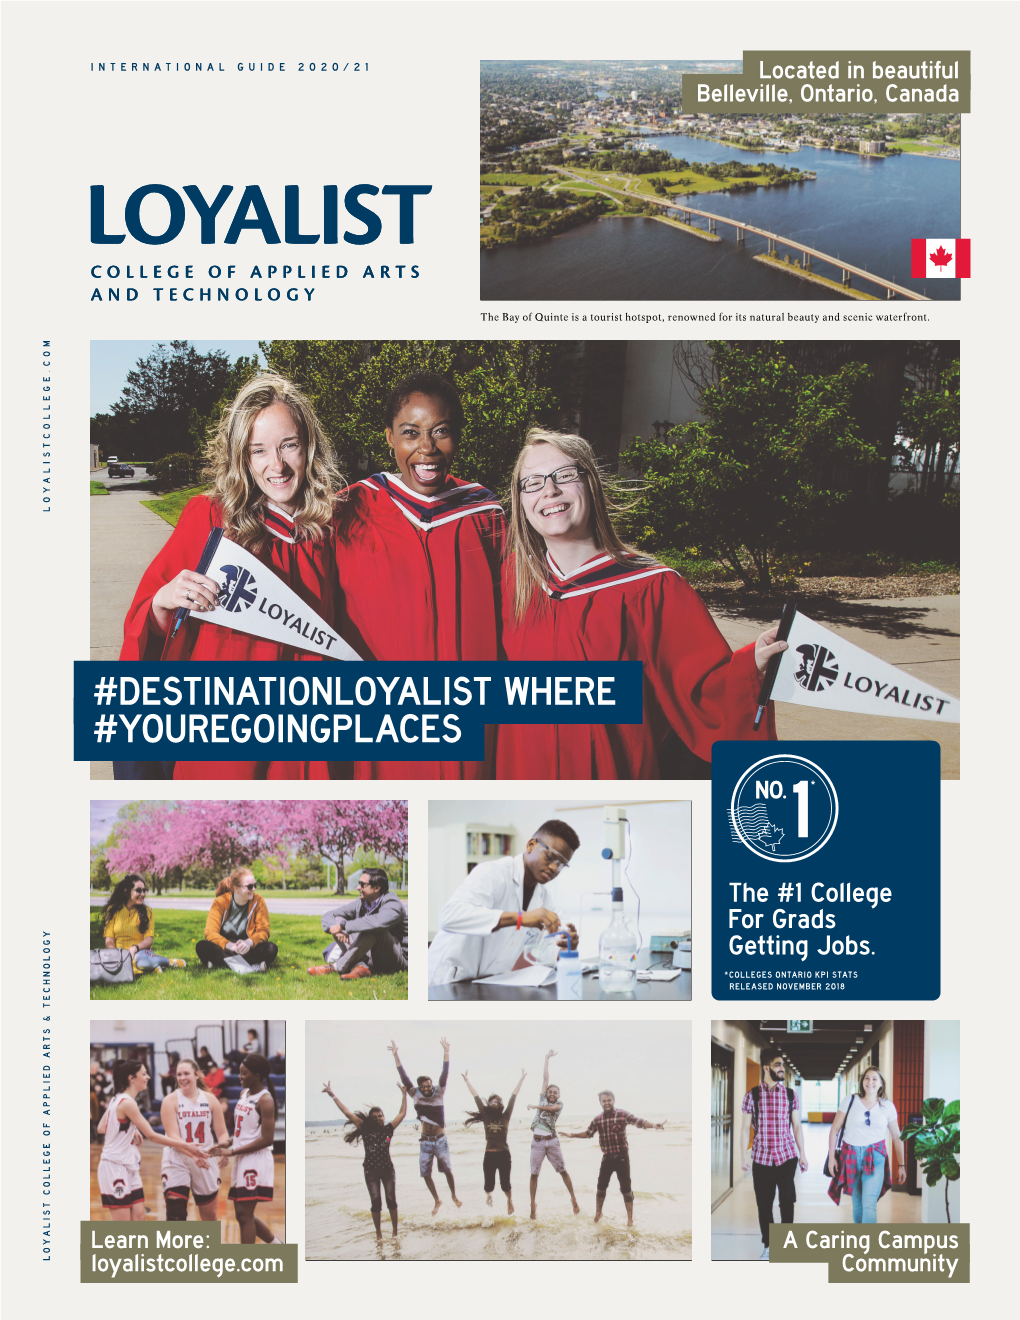 Loyalist College of Applied Arts & Technology – International Guide